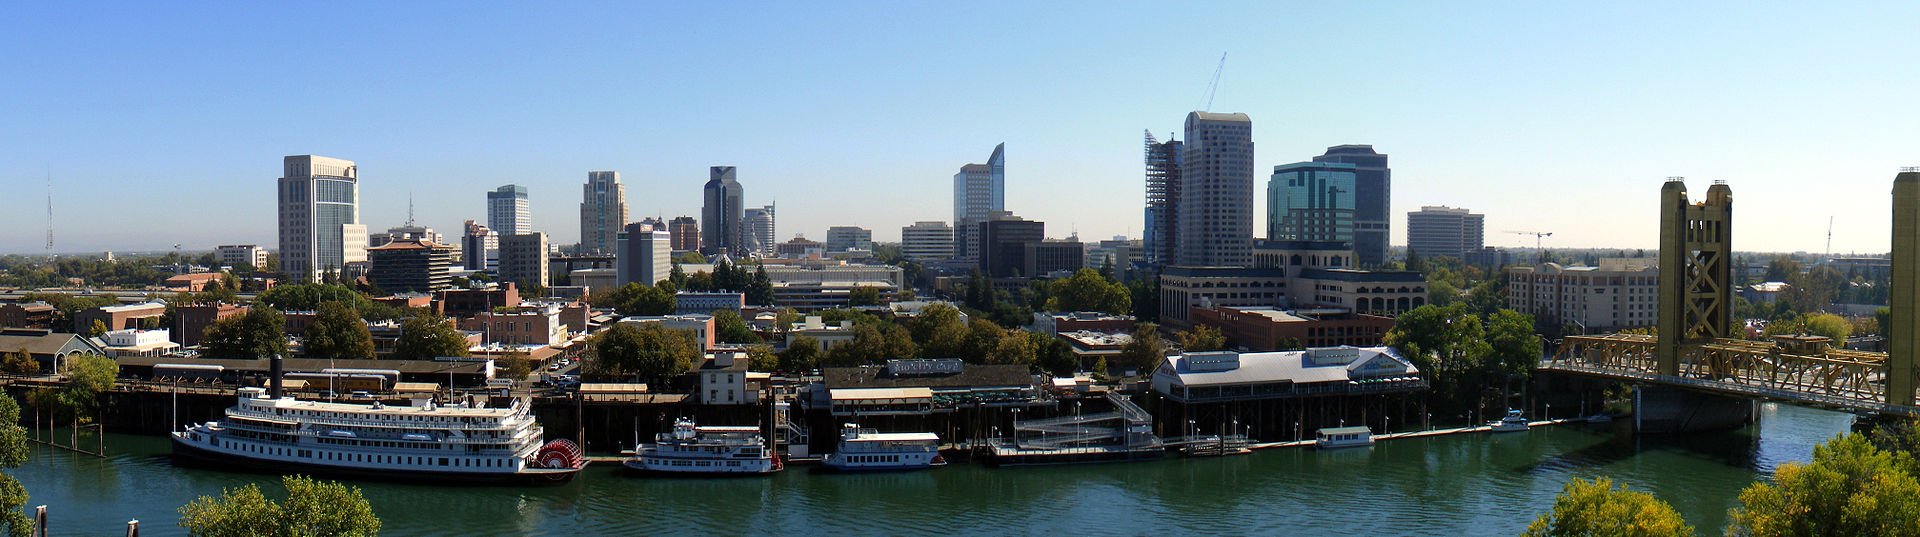 Downtown Sacramento is home to the California State Capitol, the NBA's Sacramento Kings and more great restaurants than one can count.